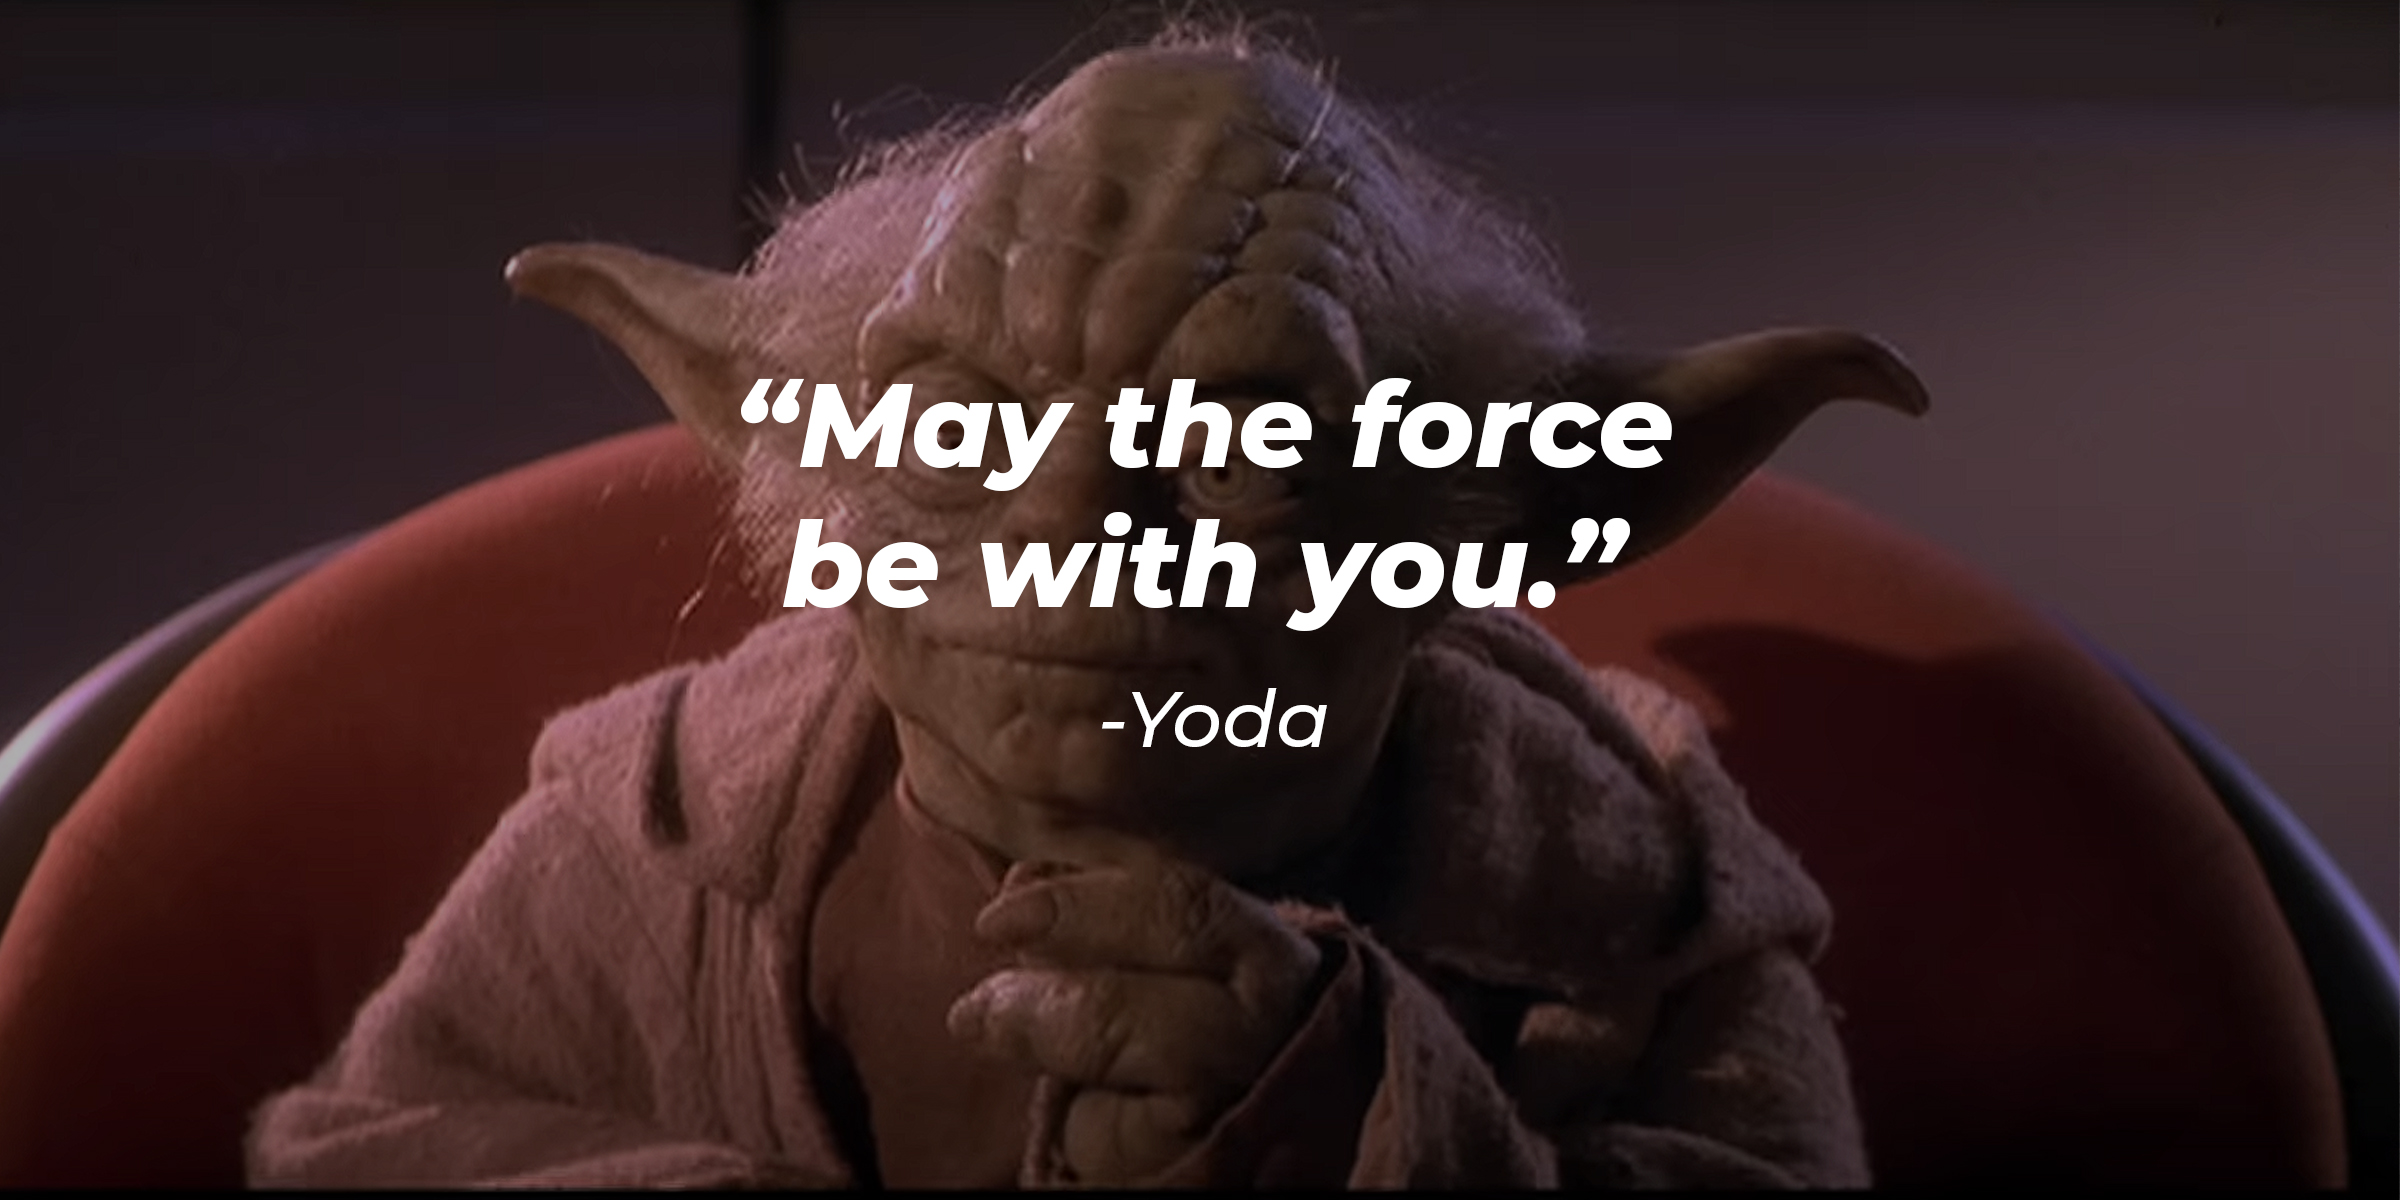 Yoda with his quote: "May the force be with you." | Source: Youtube/StarWars